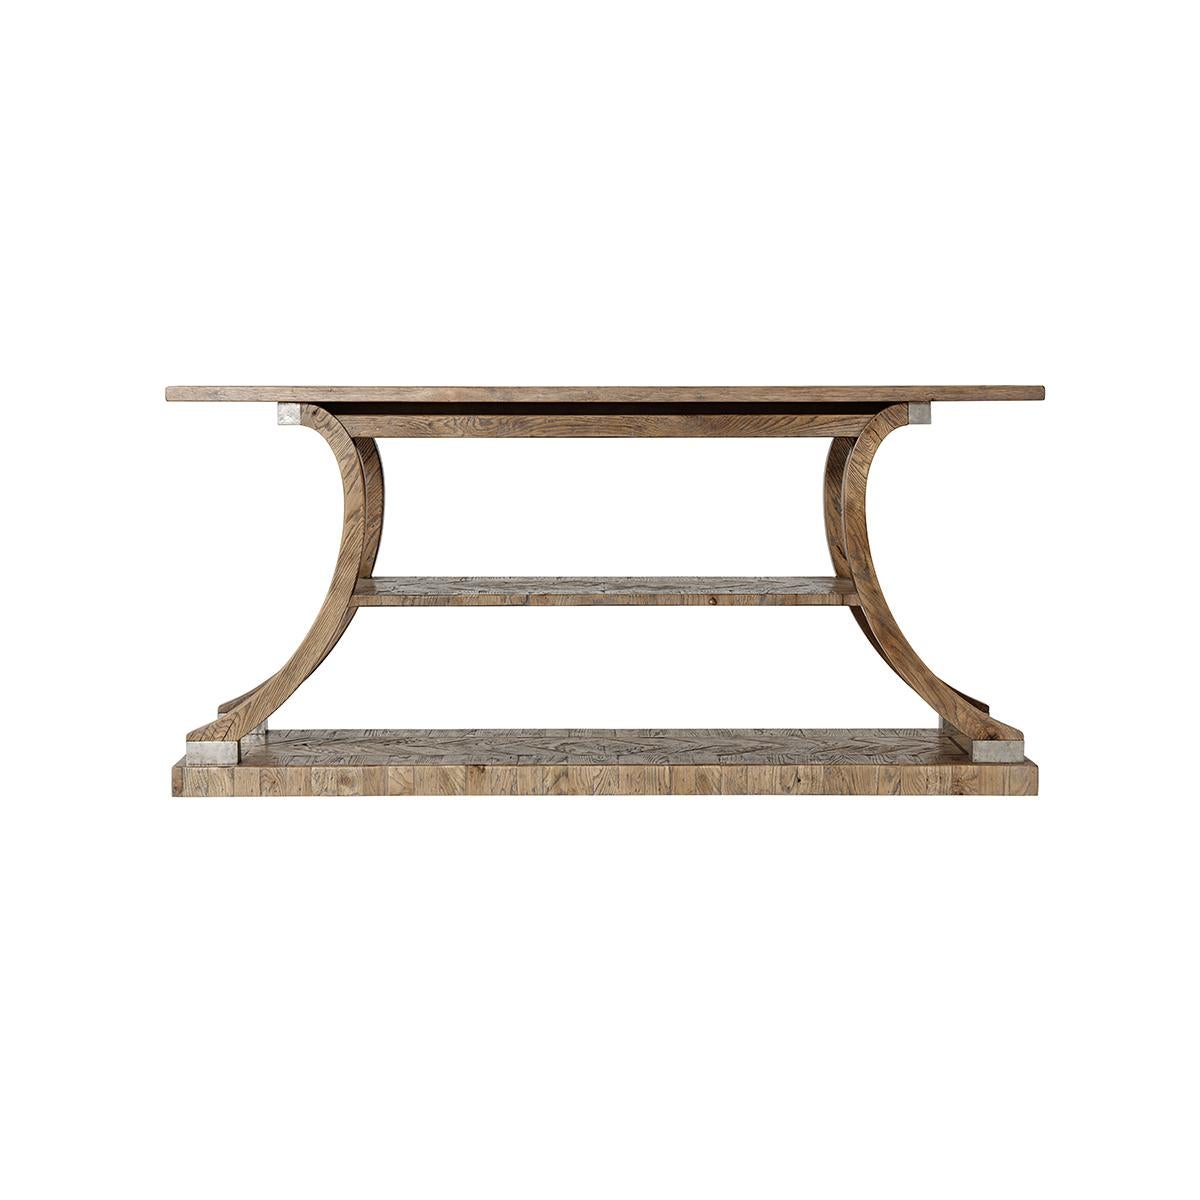 A modern rustic parquetry inlaid console table in a light echo oak finish with a chevron inlaid parquetry top, above a unique multi-tier base with inswept legs raised with vintage metal mounts on an inlaid plinth base.

Dimensions: 68